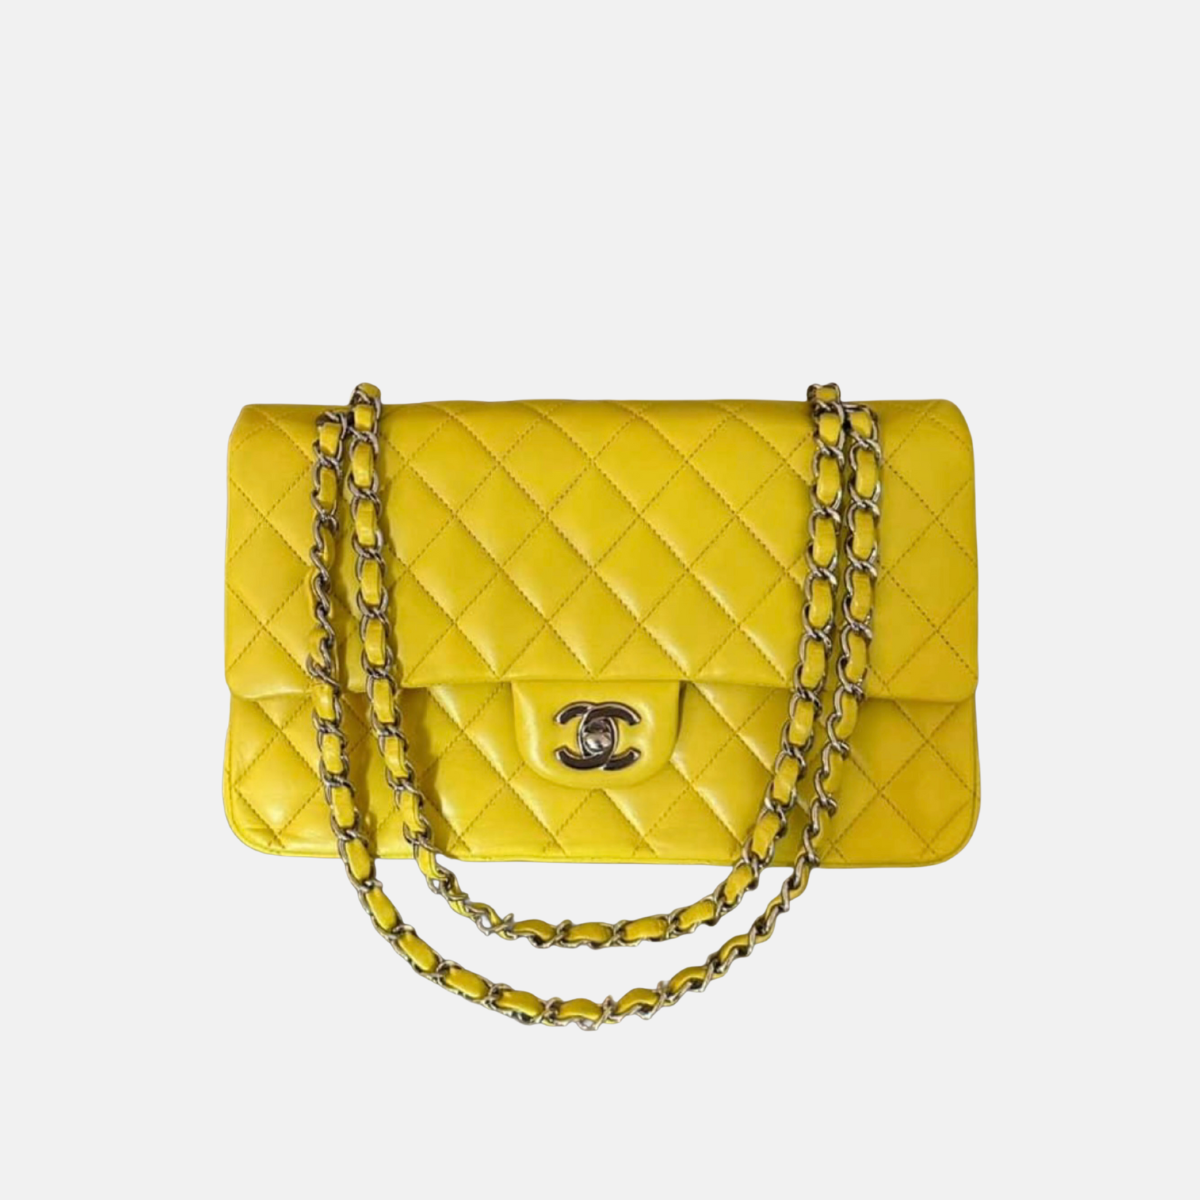 Chanel Yellow Quilted Caviar Leather Jumbo Classic Single Flap Bag Chanel